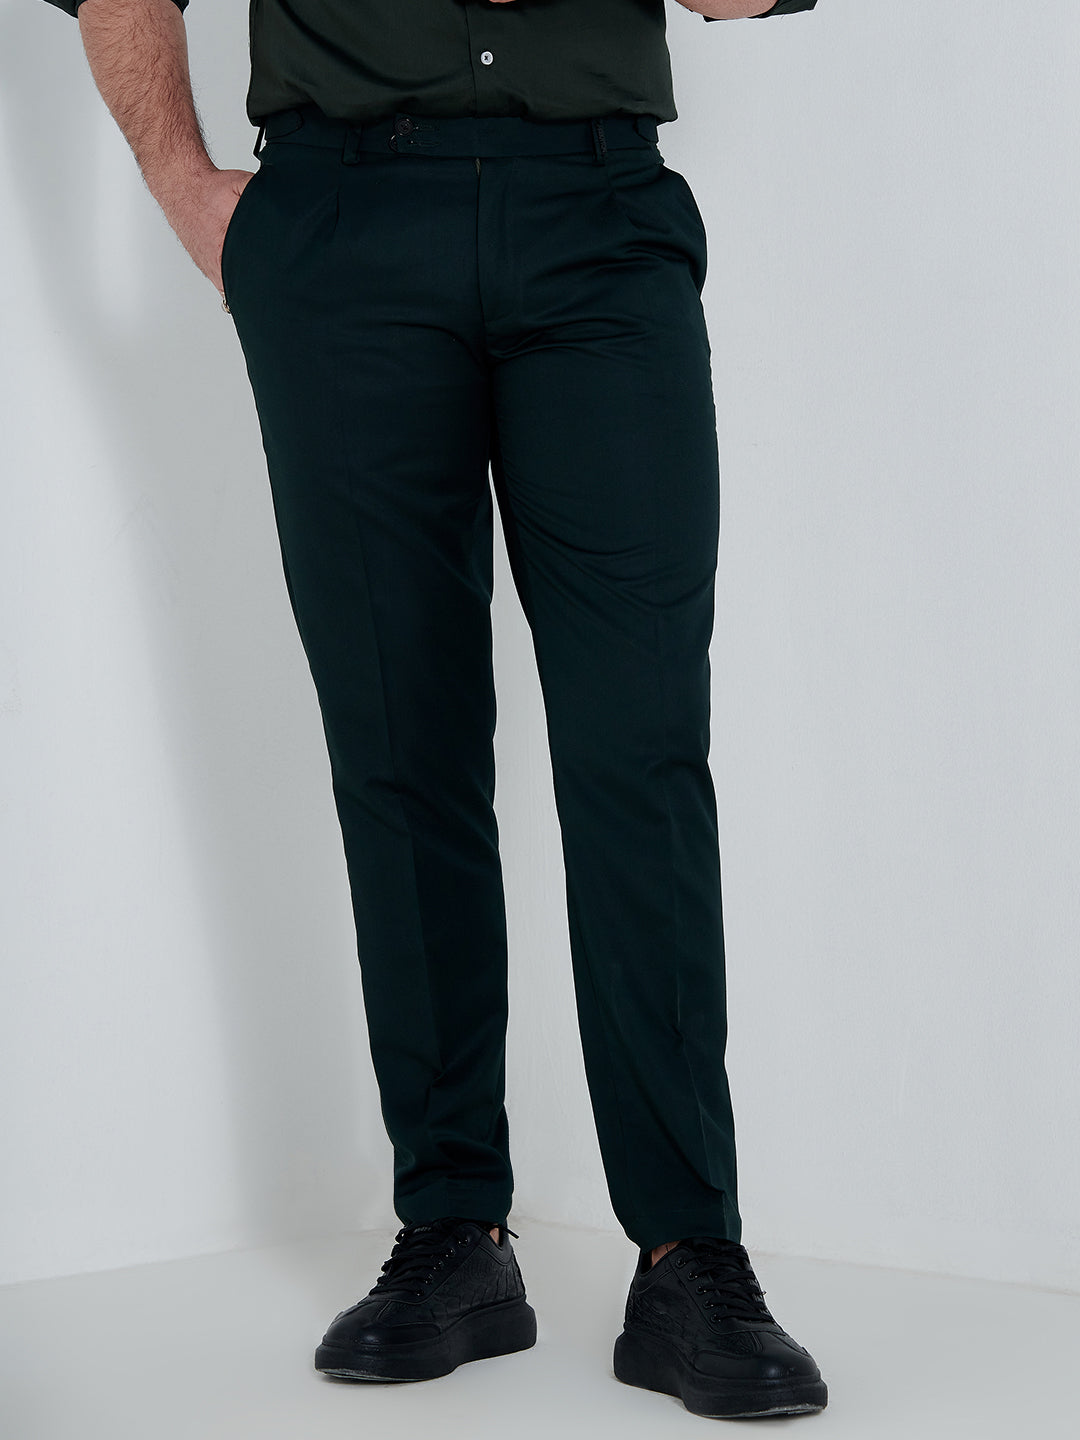 Monobi mens green trousers with integrated belt